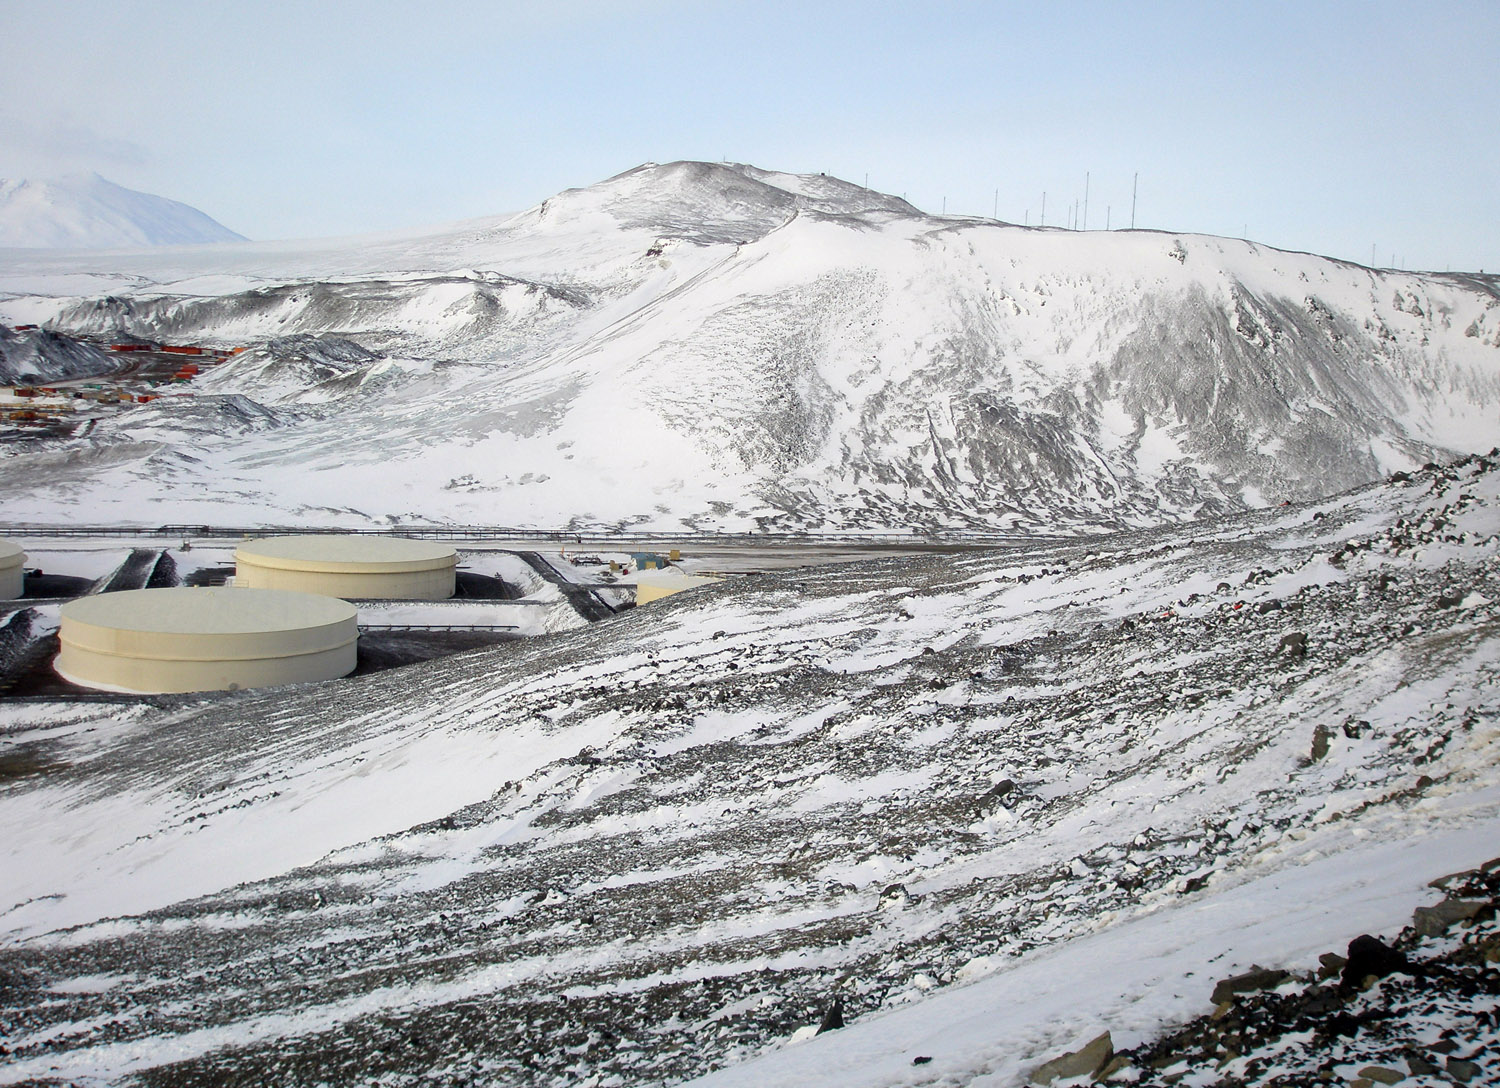 McMurdo Station from a point about one third of the way up Observation Hill